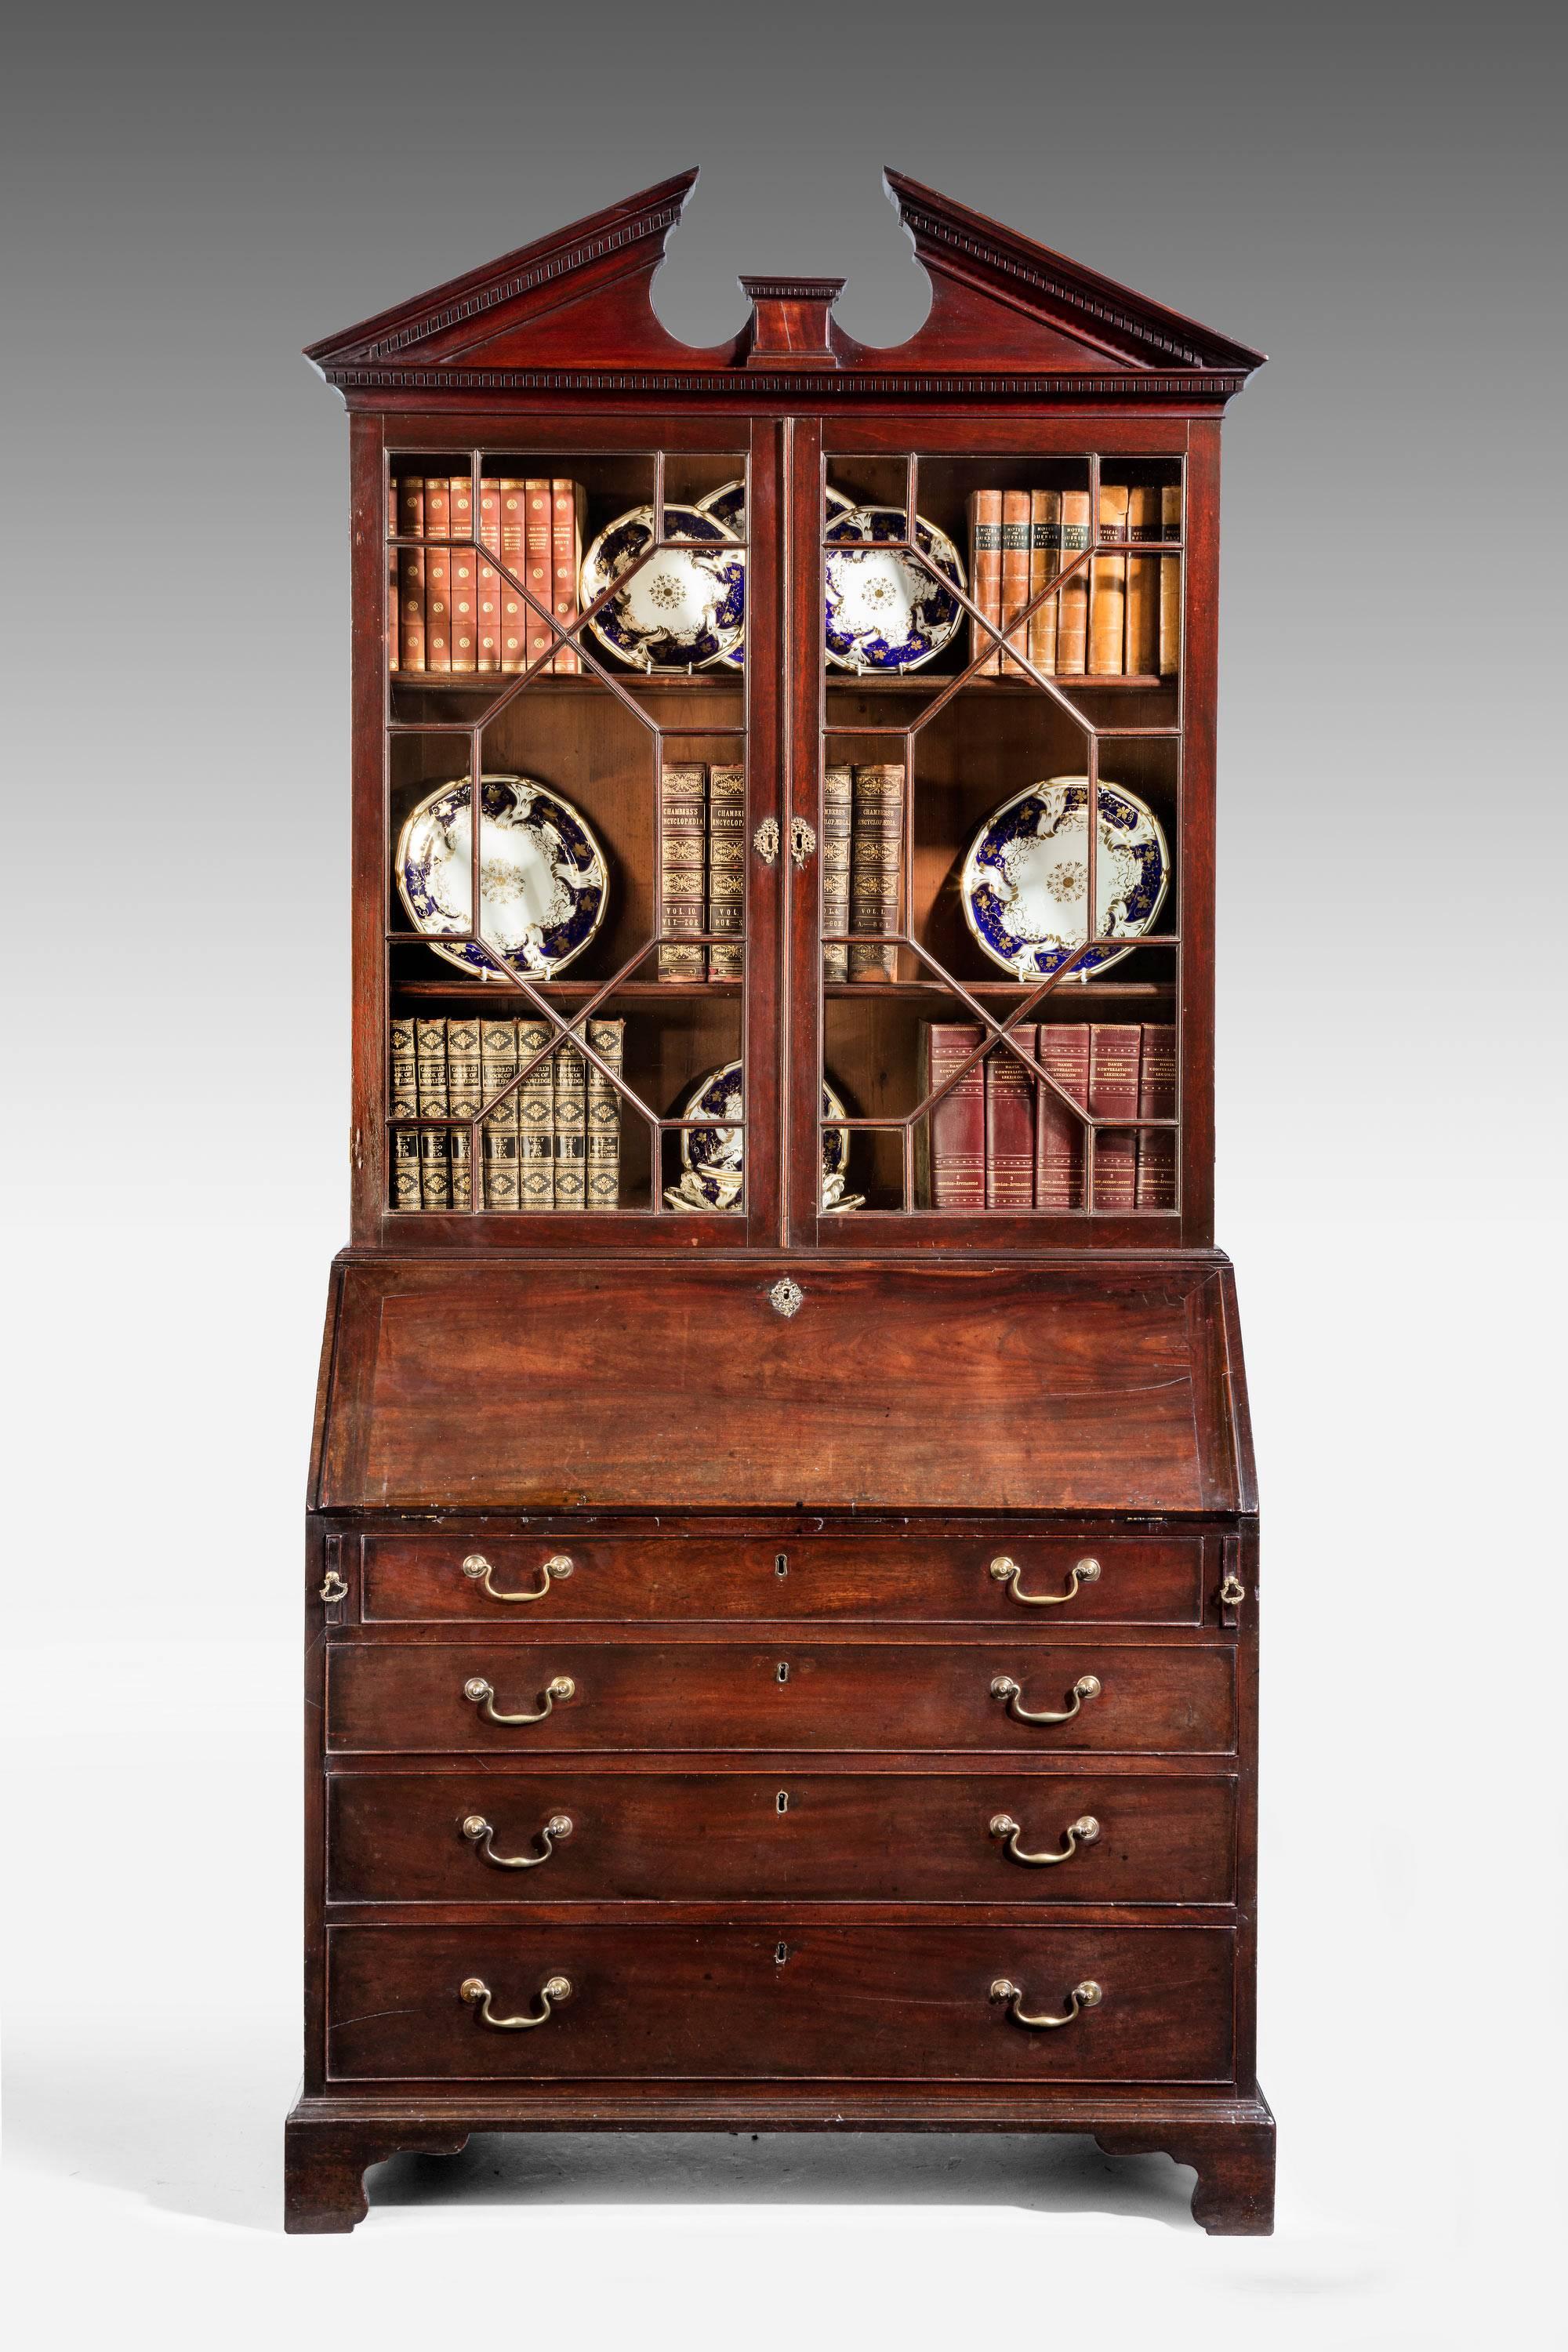 A George III period mahogany bureau bookcase with associated glazed top of the same period. The top with a broken arch pediment and good quality glazing bars. The base of the bureau beautifully fitted with numerous pigeon holes, drawers and four